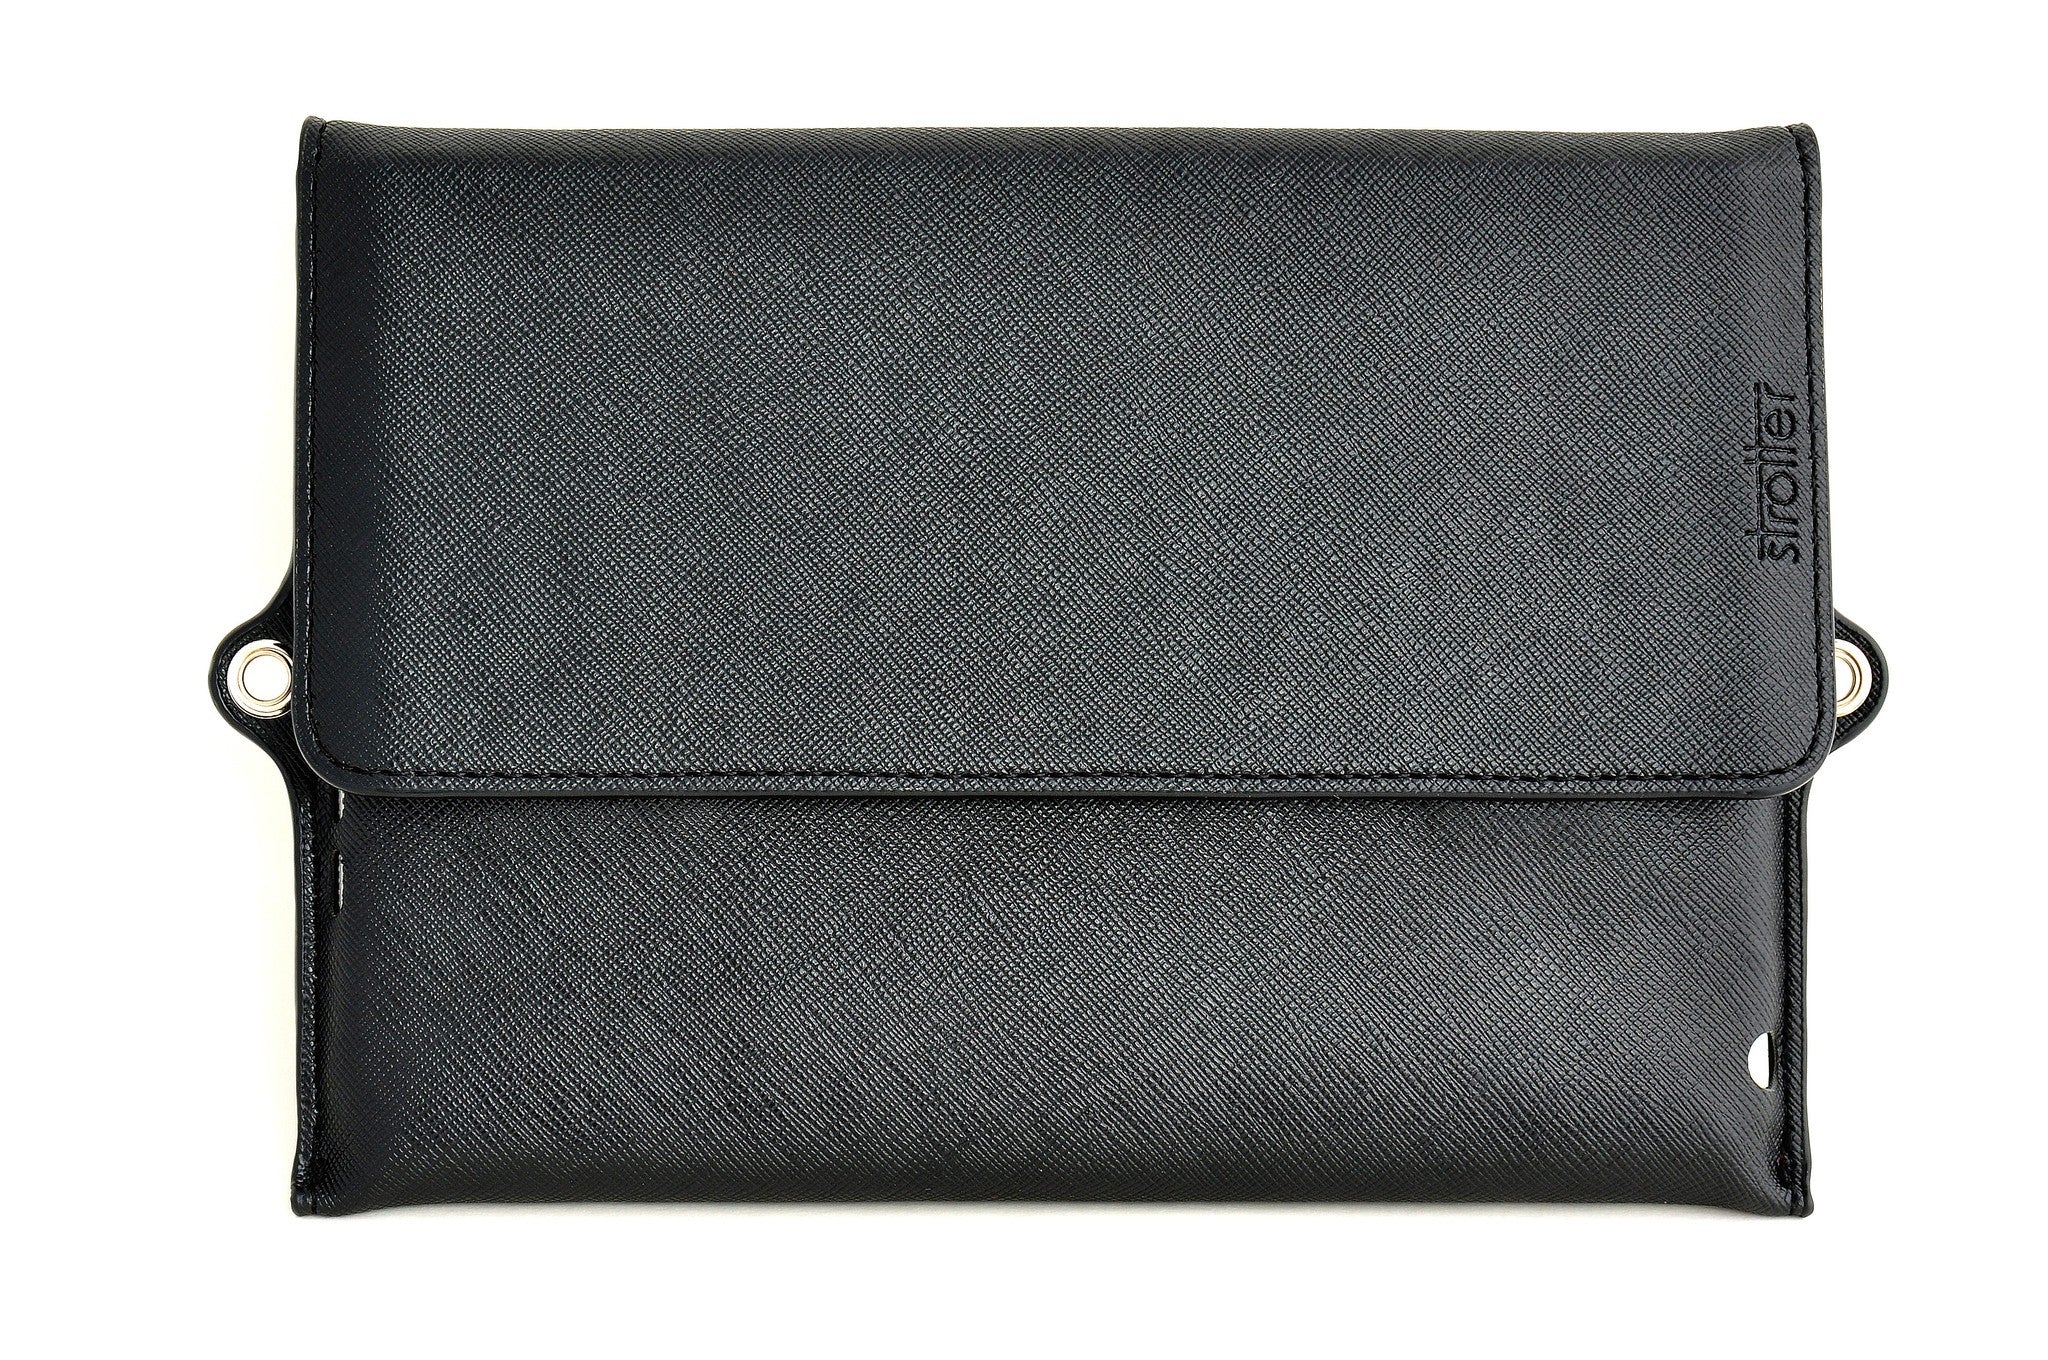 Case for iPad Mini - Across SL (synthetic leather) in black.